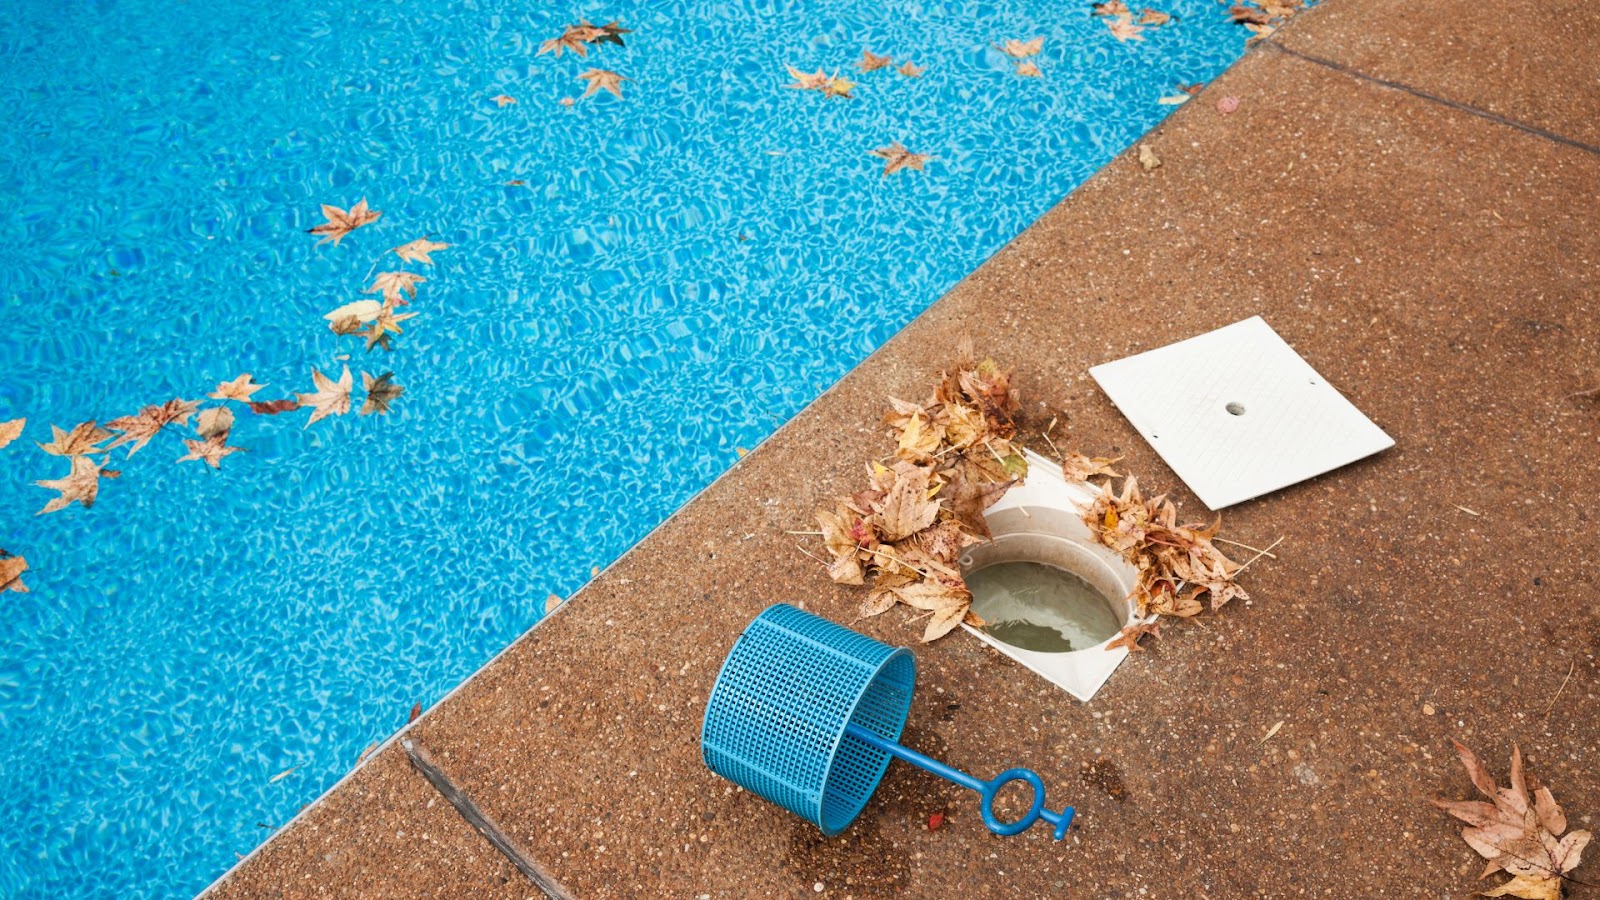 How to Clean a Pool After a Storm or Remove Large Debris